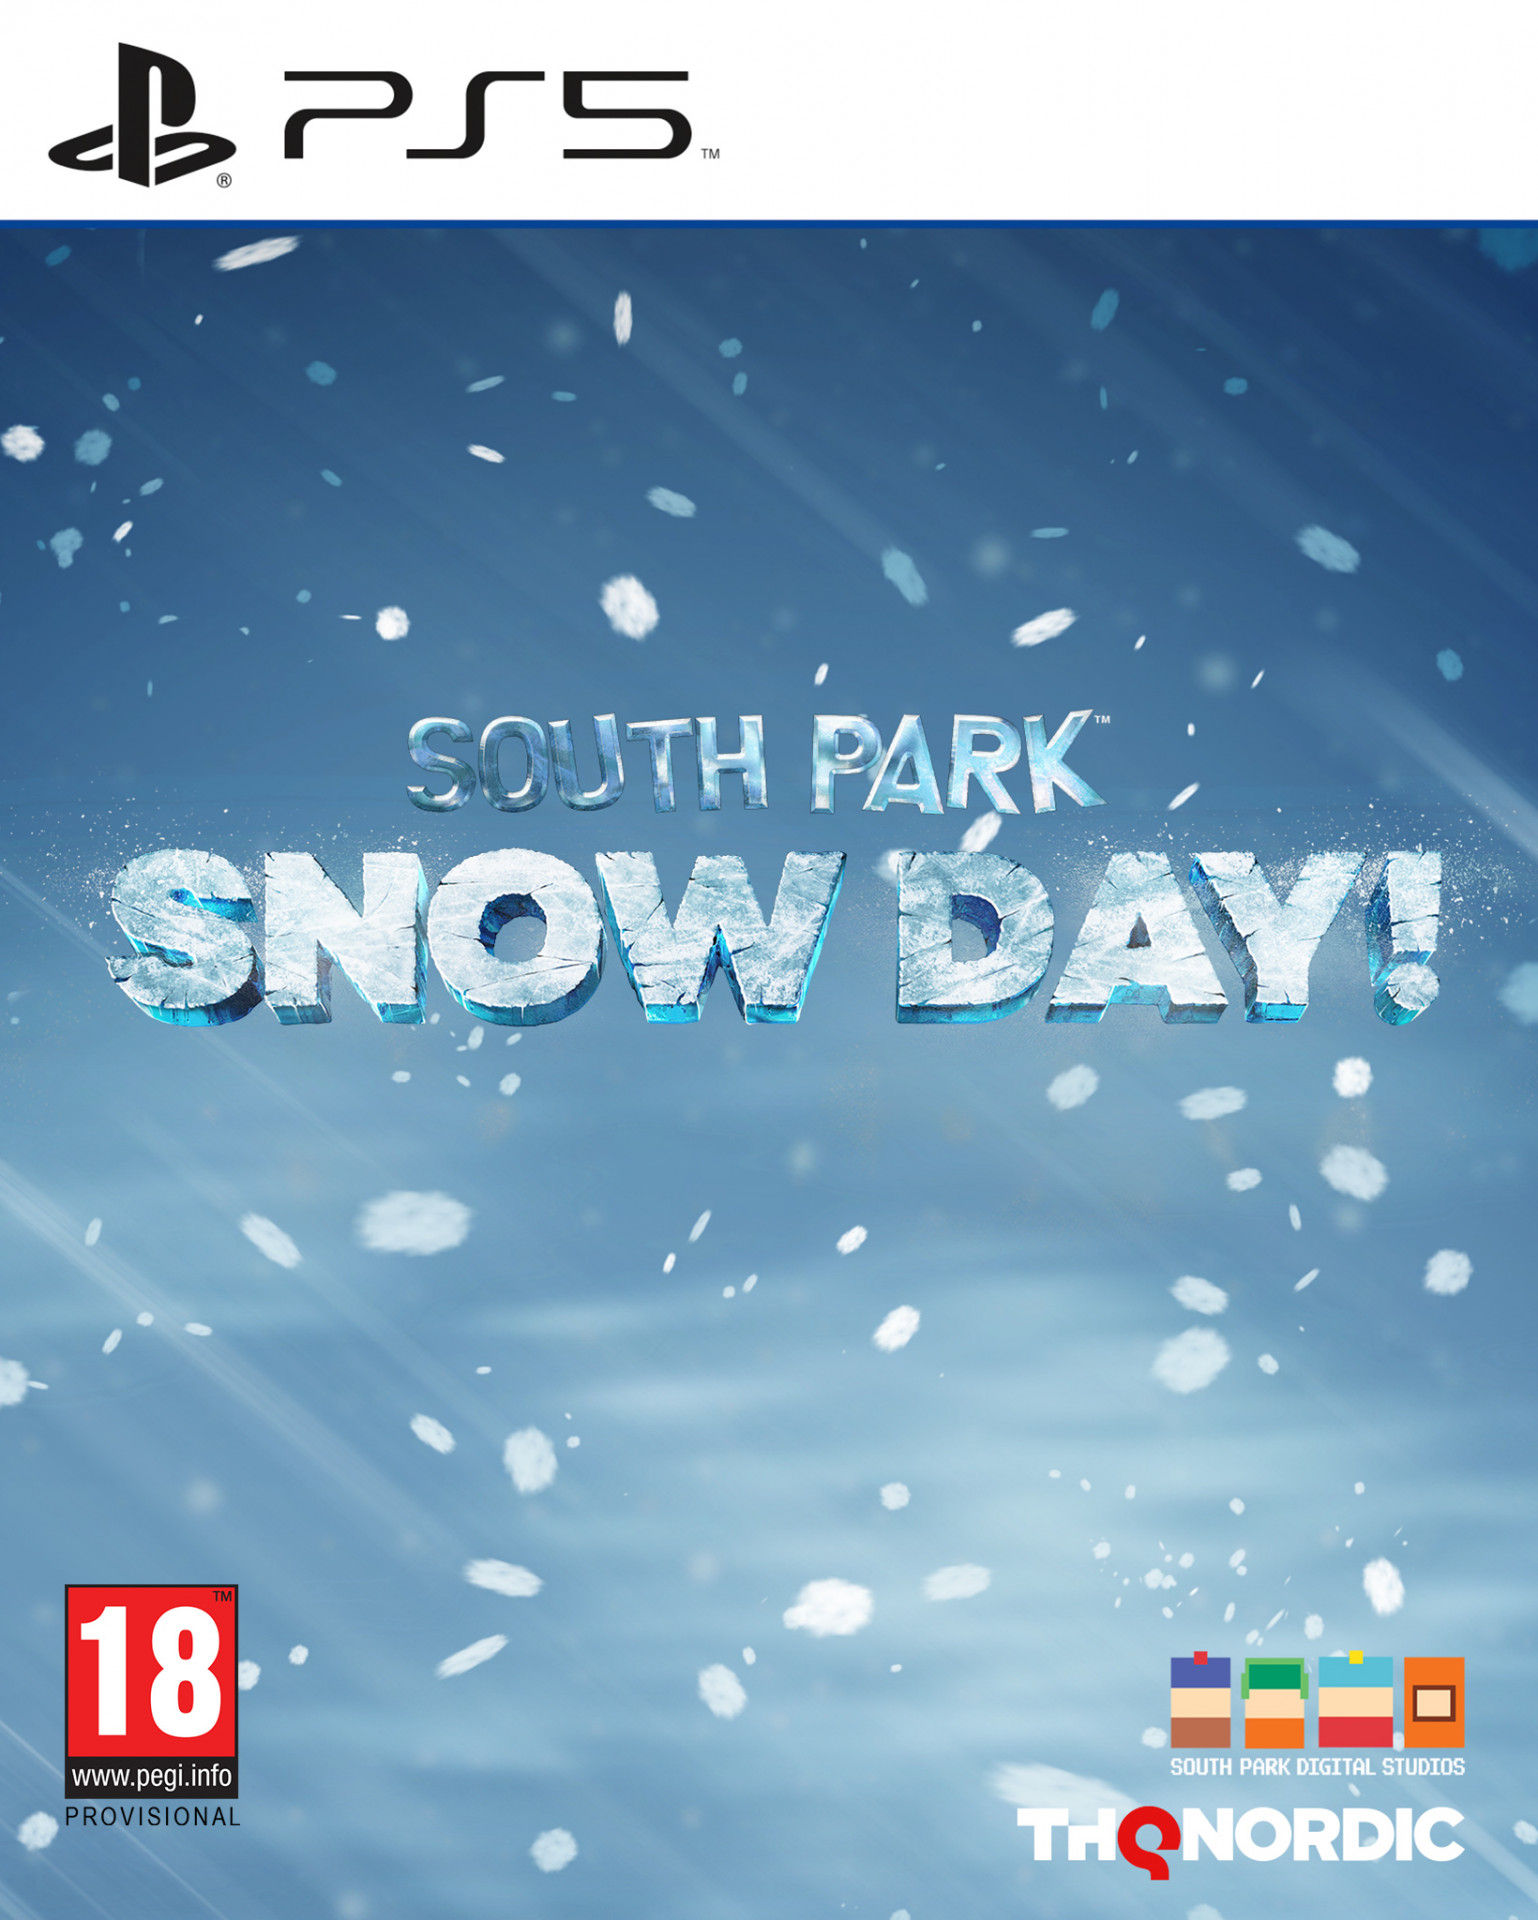 South Park - Snow Day! PlayStation 5